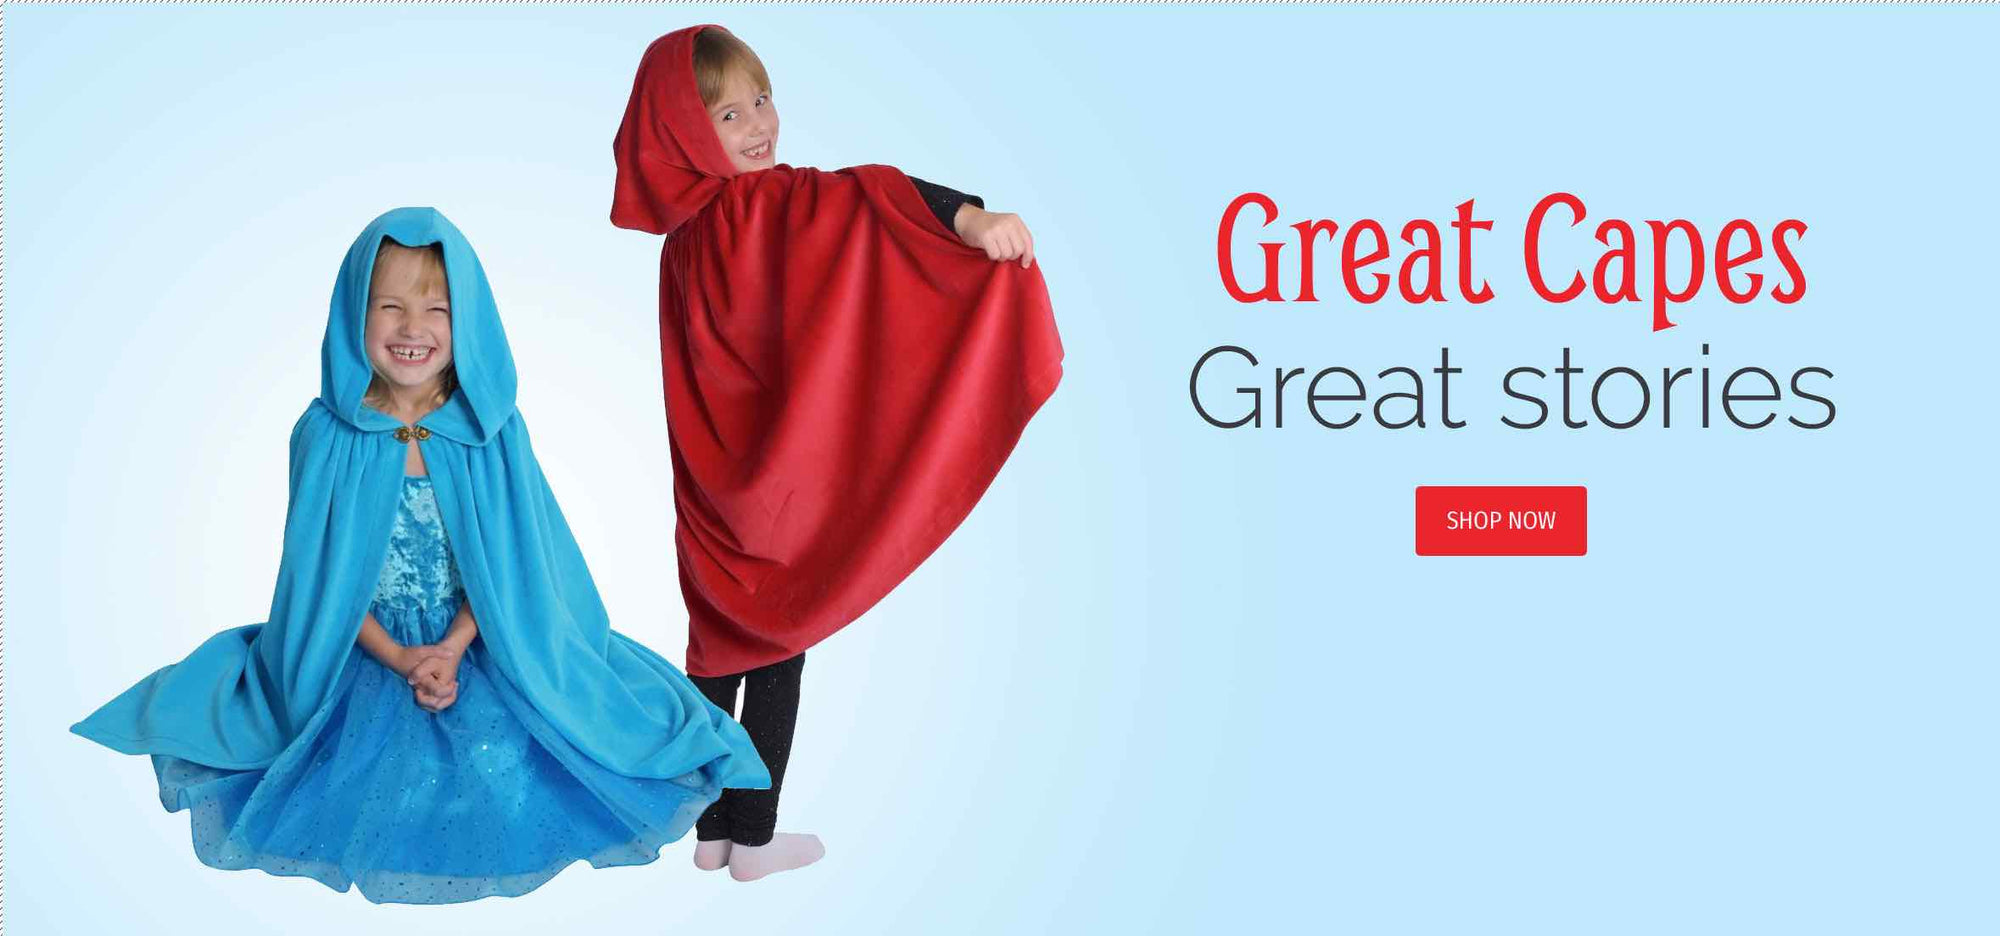 Image of kids wearing dress up capes and costumes. Text reads: Great Capes. Great Stories.